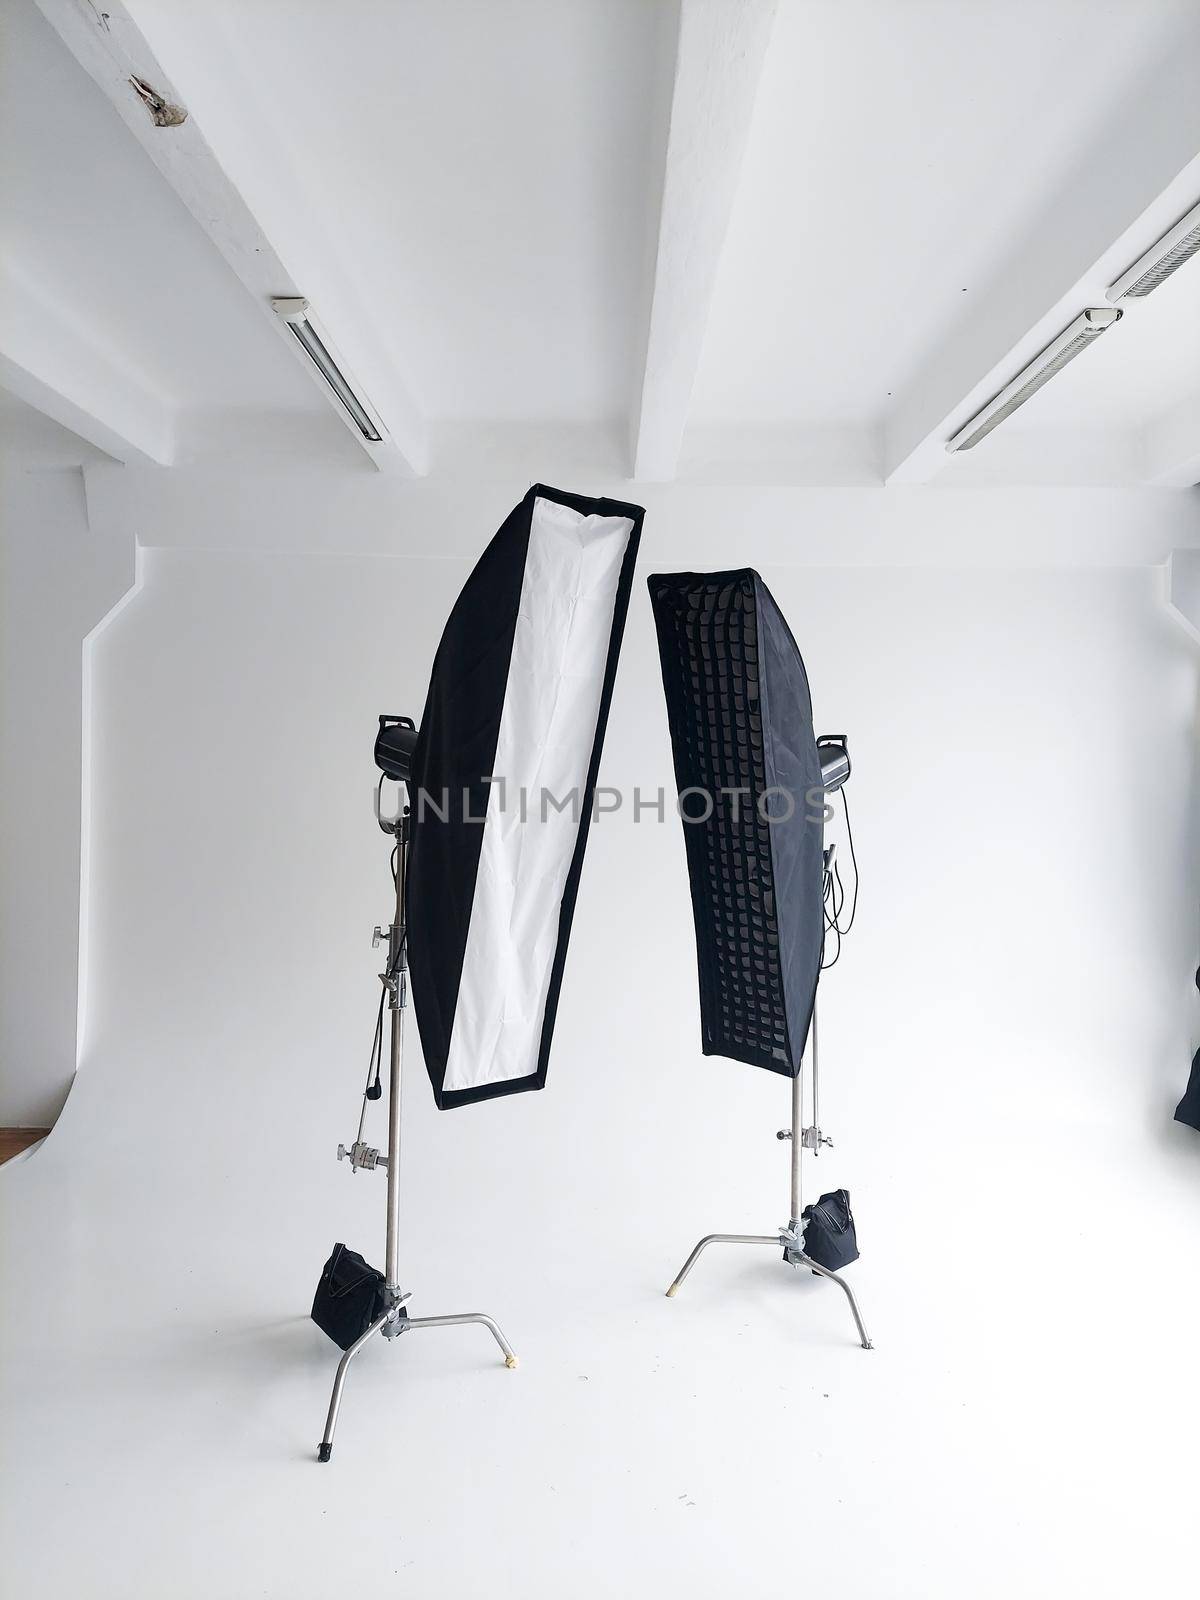 Lighting equipment on a cyclorama in modern photo studio. Two stripboxes on a c-stand on a clean white cyclorama background. Professional lighting equipment. by vovsht